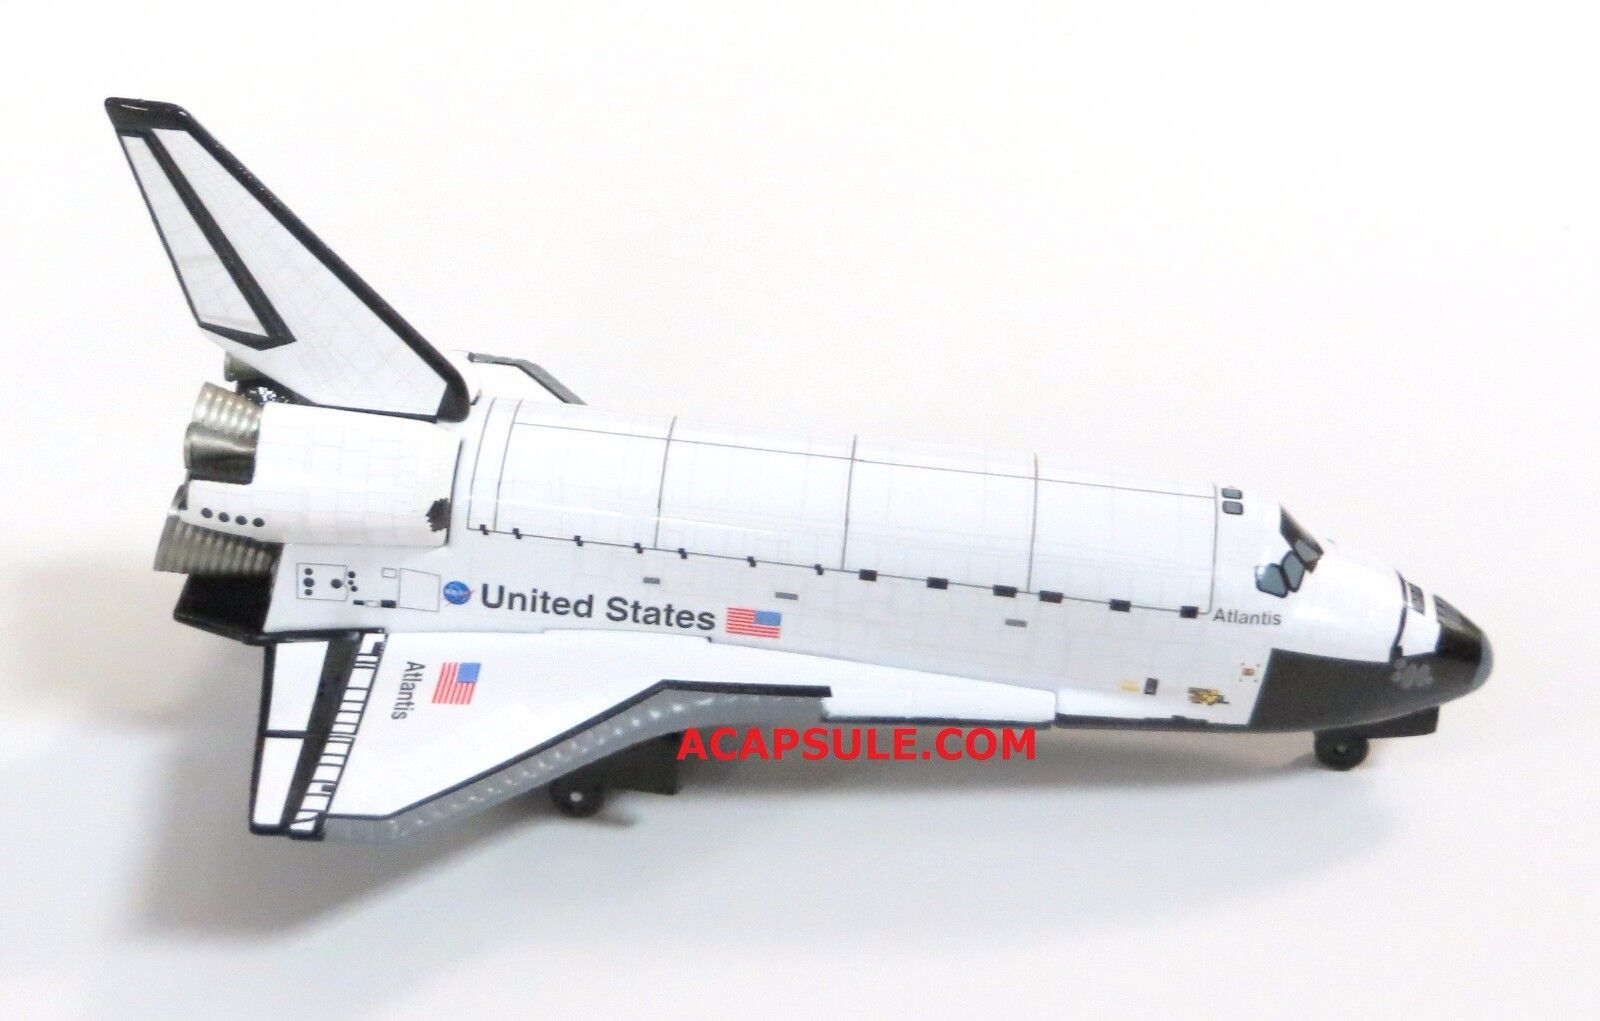 NASA Space Shuttle Atlantis 1/300 Diecast Model with Stand | eBay